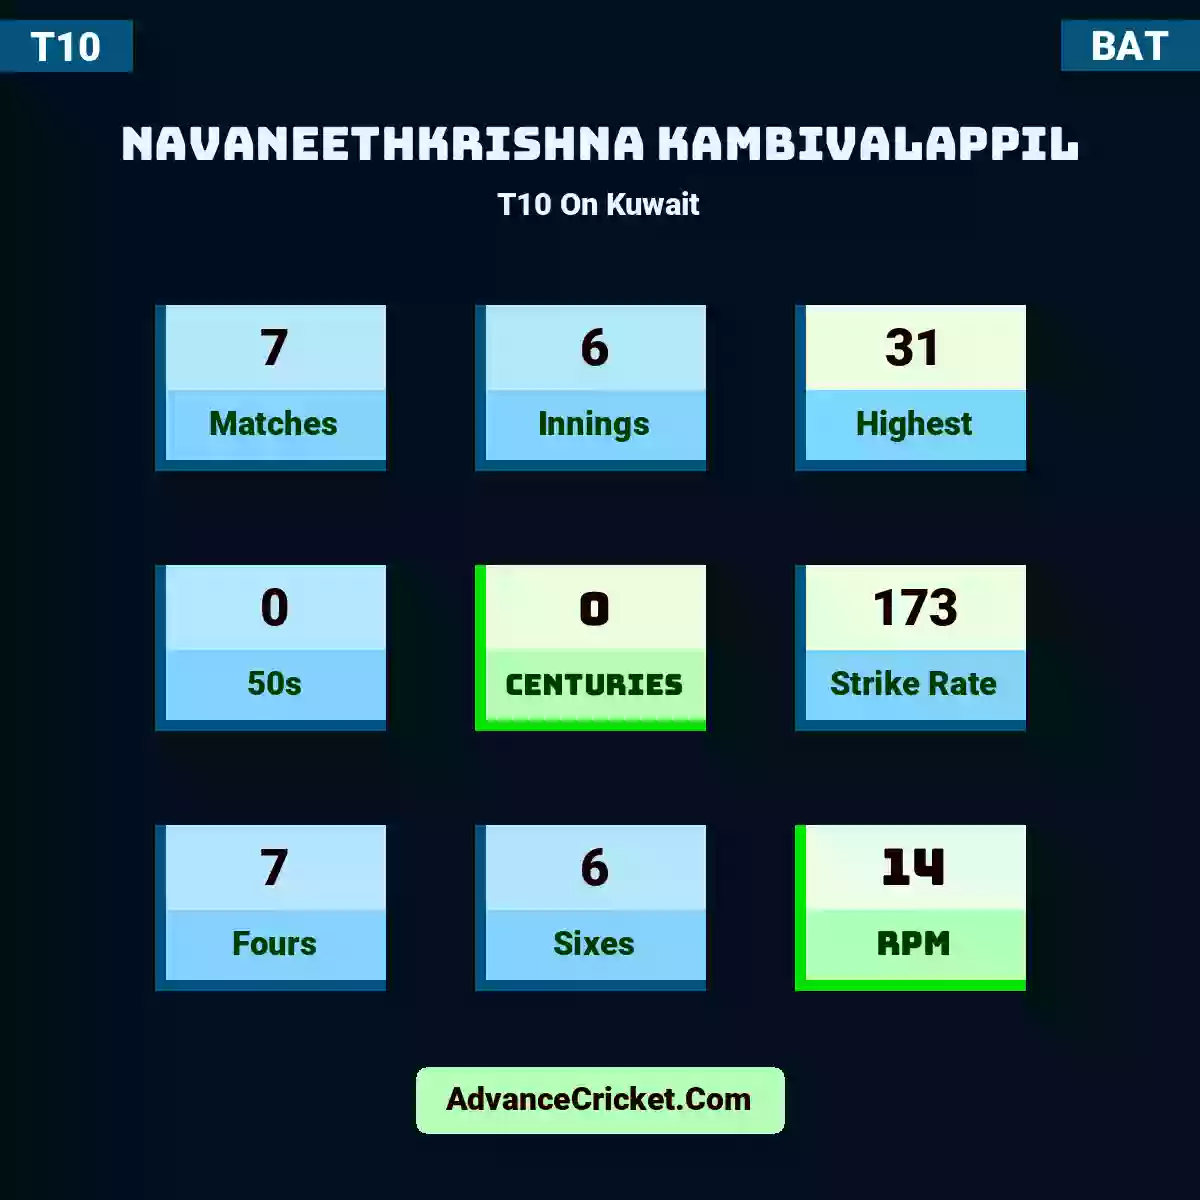 Navaneethkrishna Kambivalappil T10  On Kuwait, Navaneethkrishna Kambivalappil played 7 matches, scored 31 runs as highest, 0 half-centuries, and 0 centuries, with a strike rate of 173. N.Kambivalappil hit 7 fours and 6 sixes, with an RPM of 14.